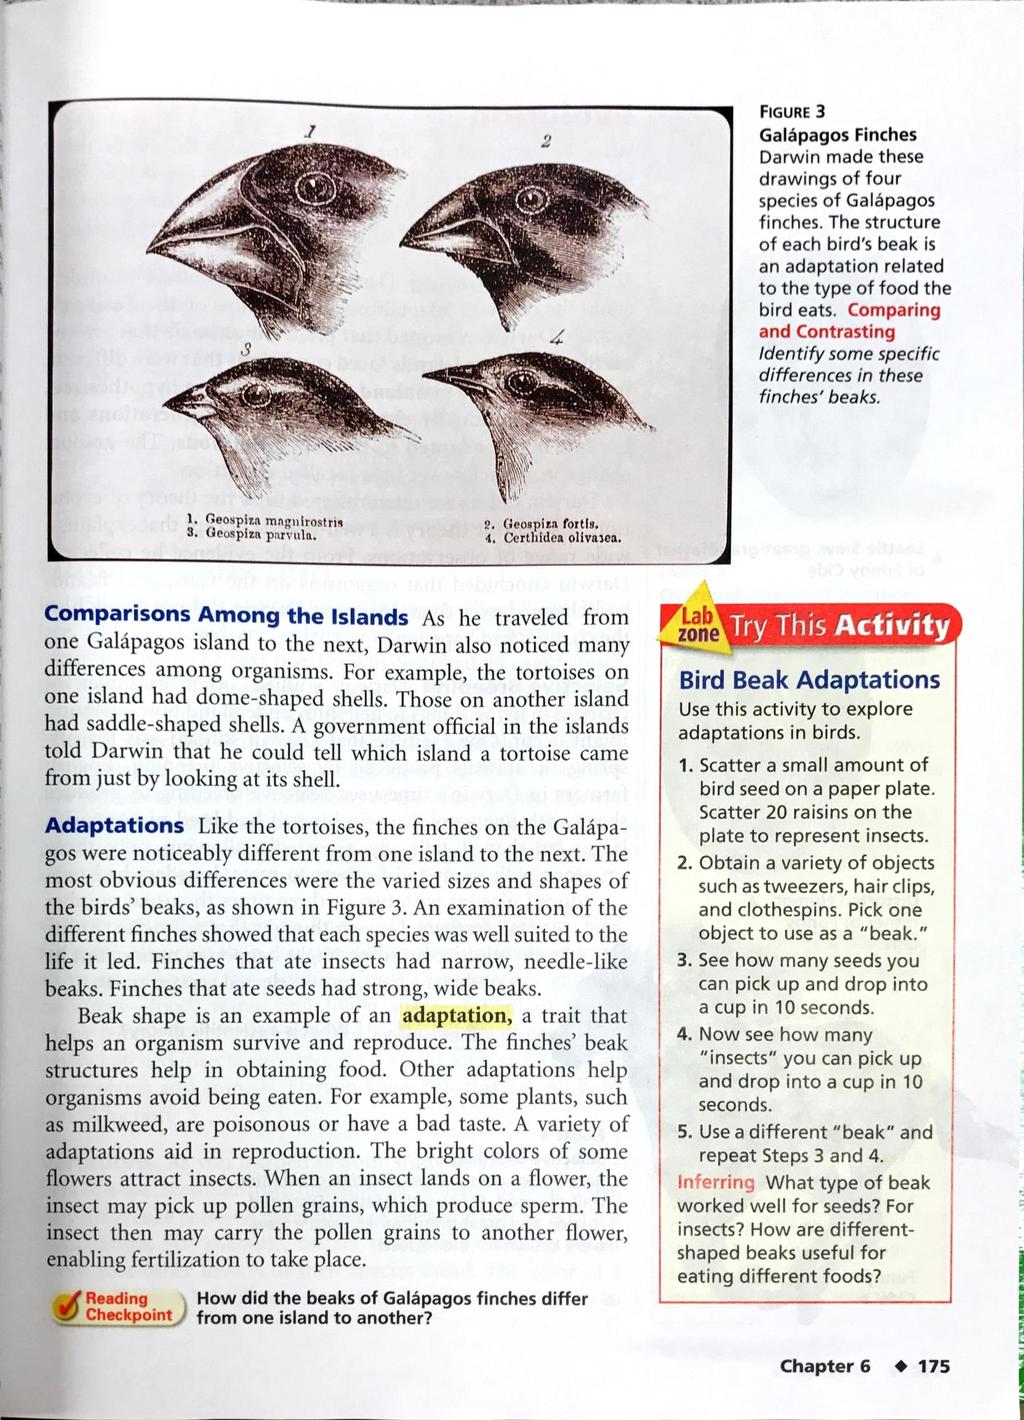 2 FIGURE 3 Galåpagos Finches Darwin made these drawings of four species of Galåpagos finches. The structure of each bird's beak is an adaptation related to the type of food the bird eats.